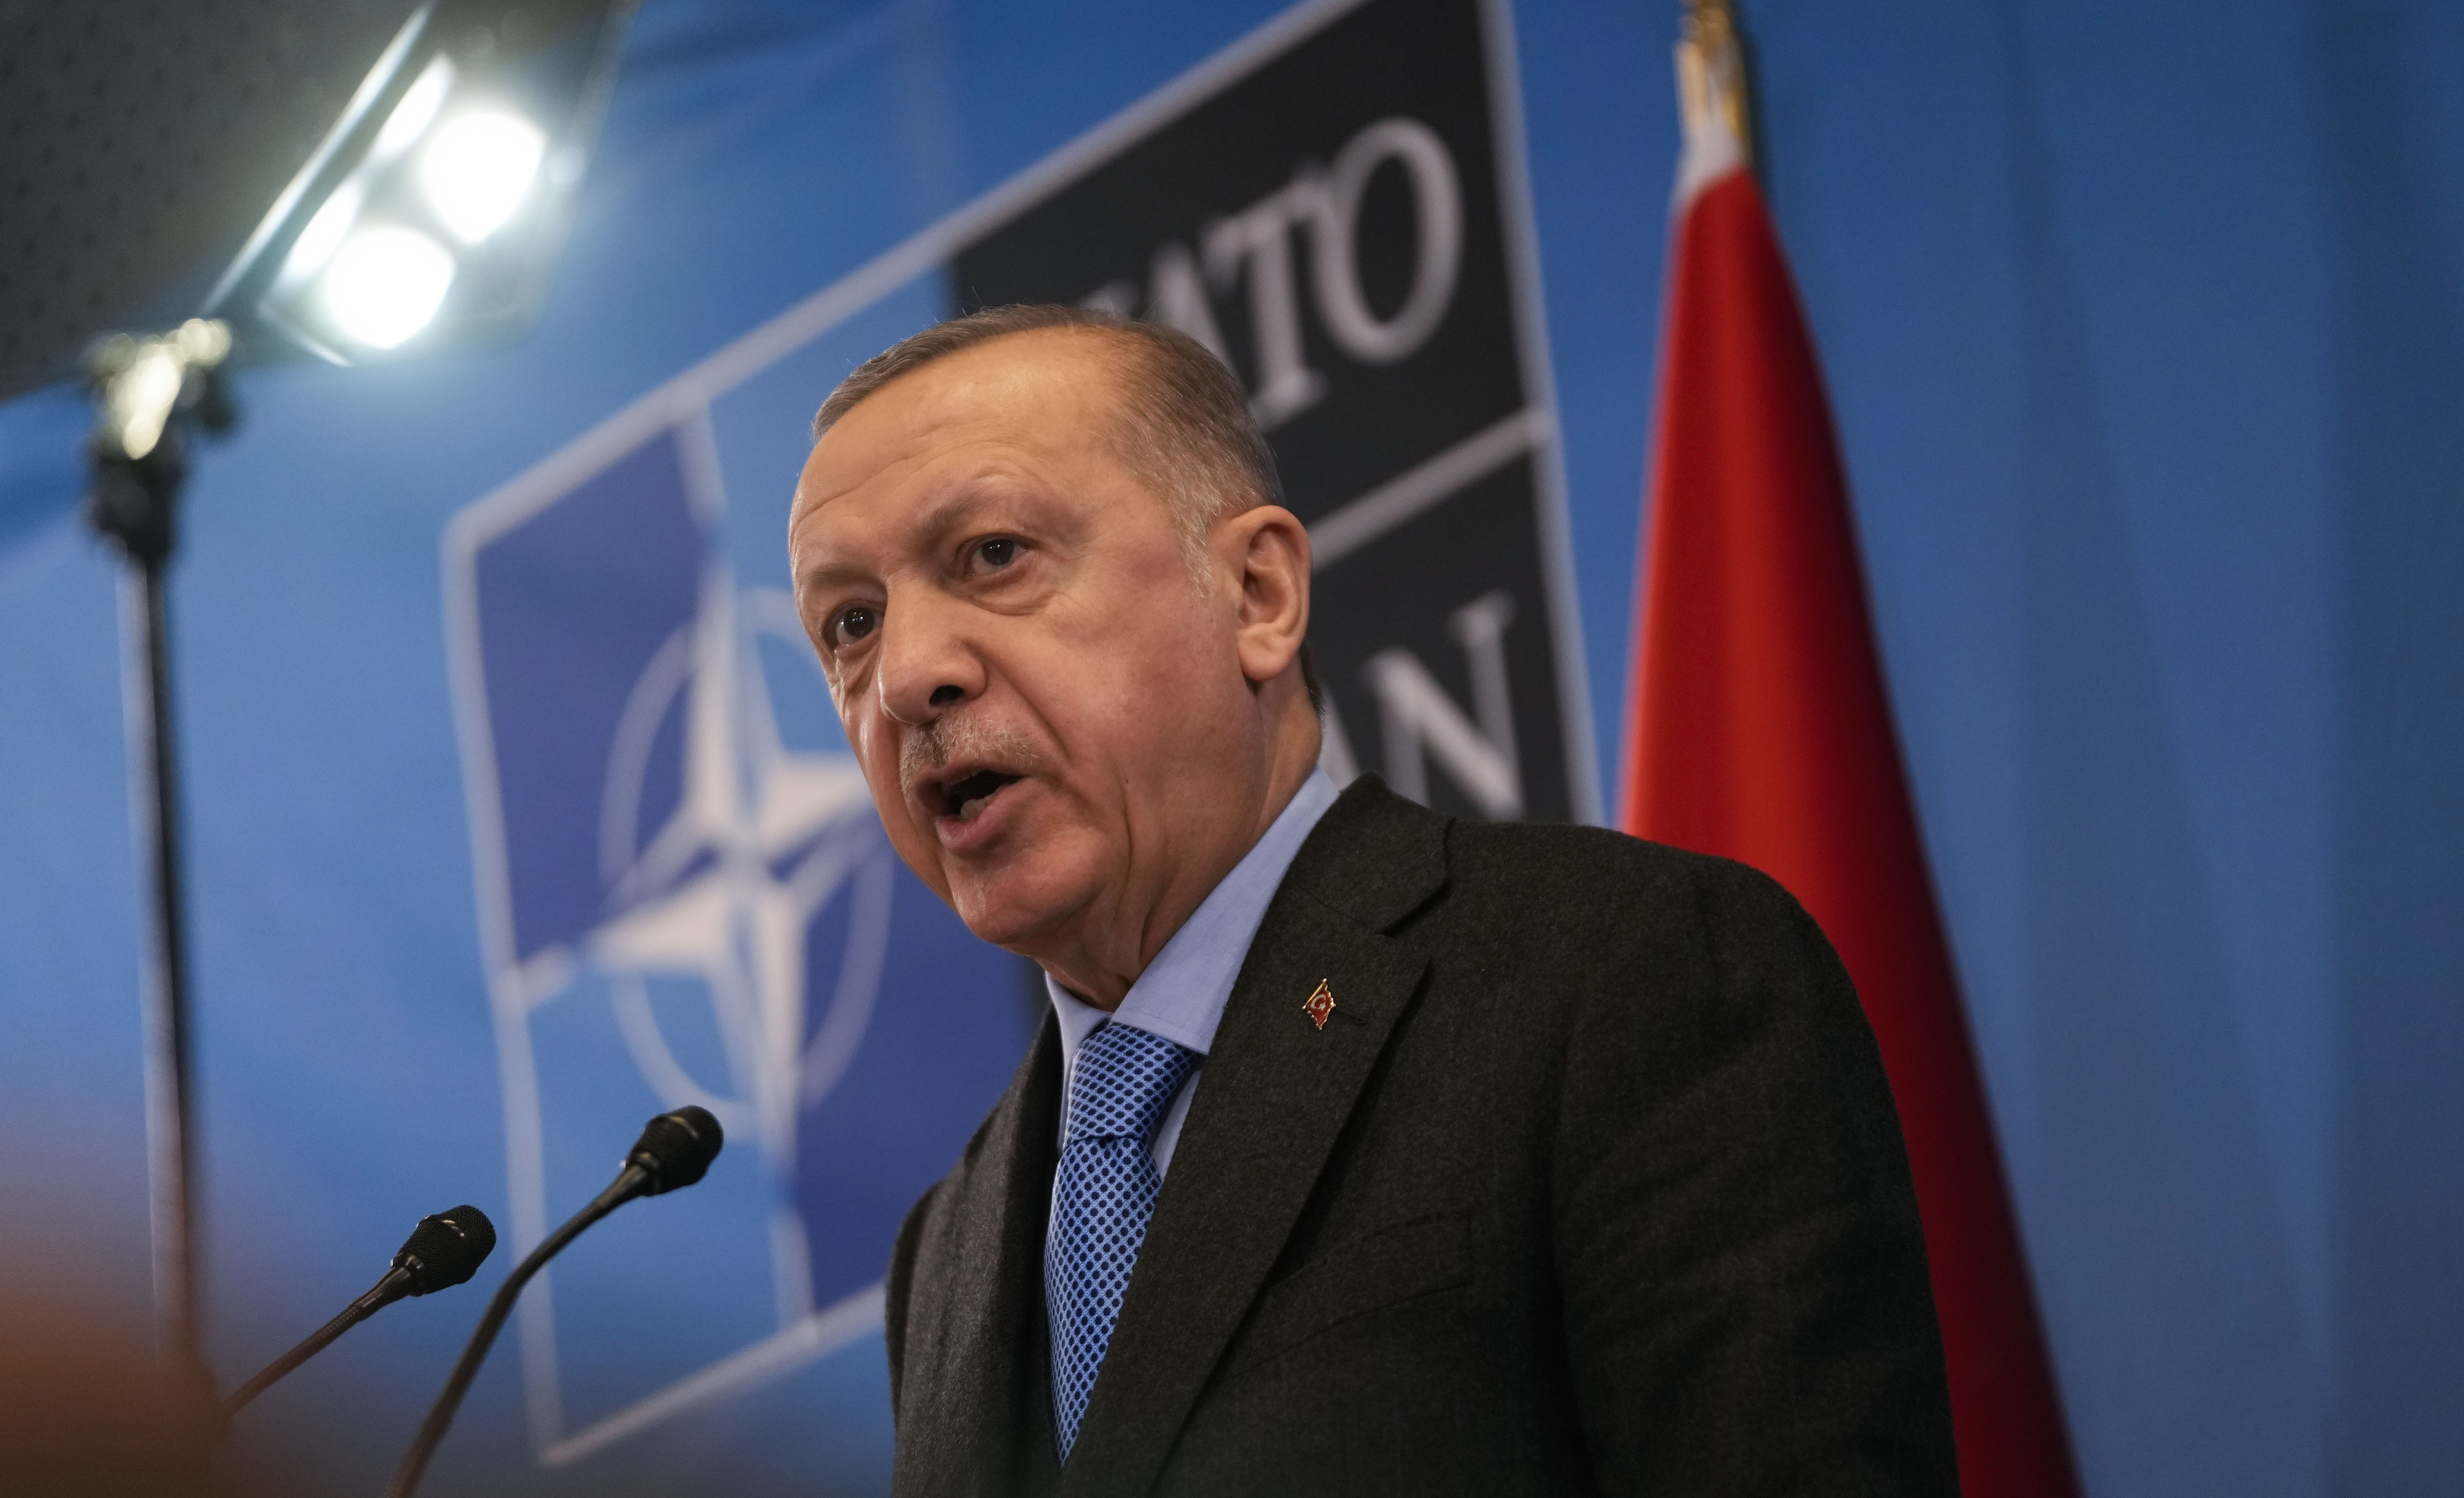 Turkish President Recep Tayyip Erdogan speaks during a news conference after an extraordinary NATO summit at the alliance's headquarters in Brussels, Belgium, on March 24.